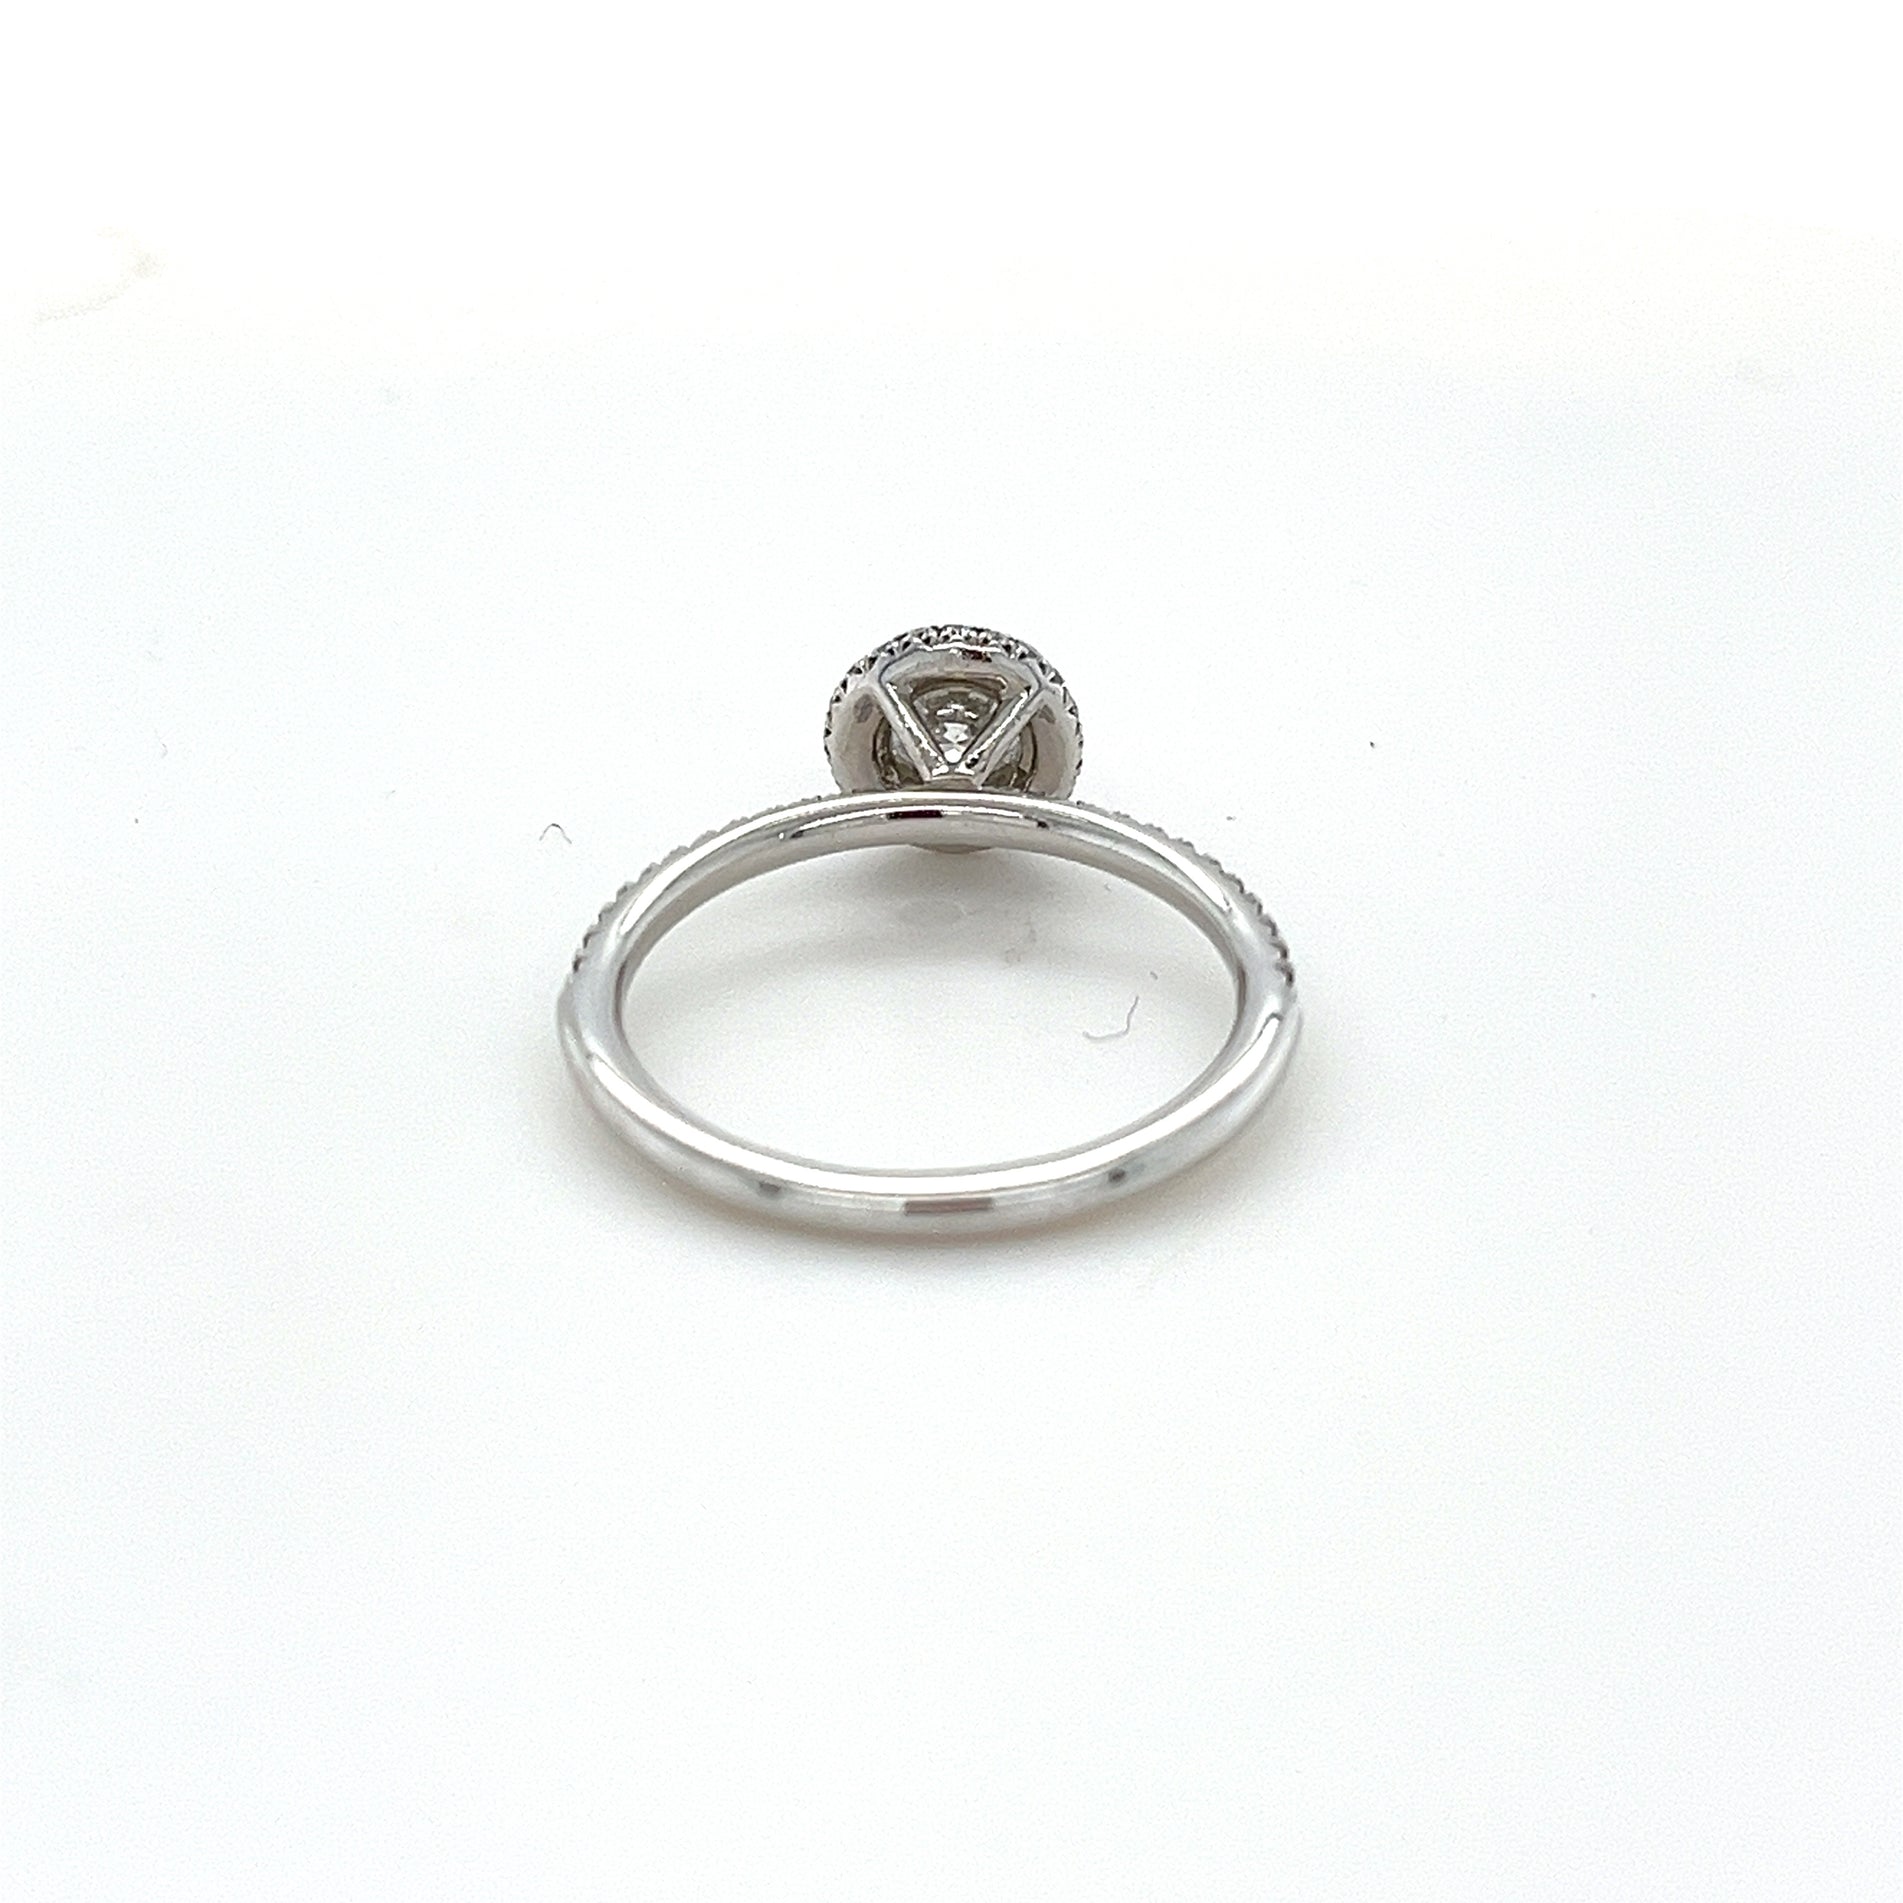 Lightbox image of diamond eternity ring with halo front view